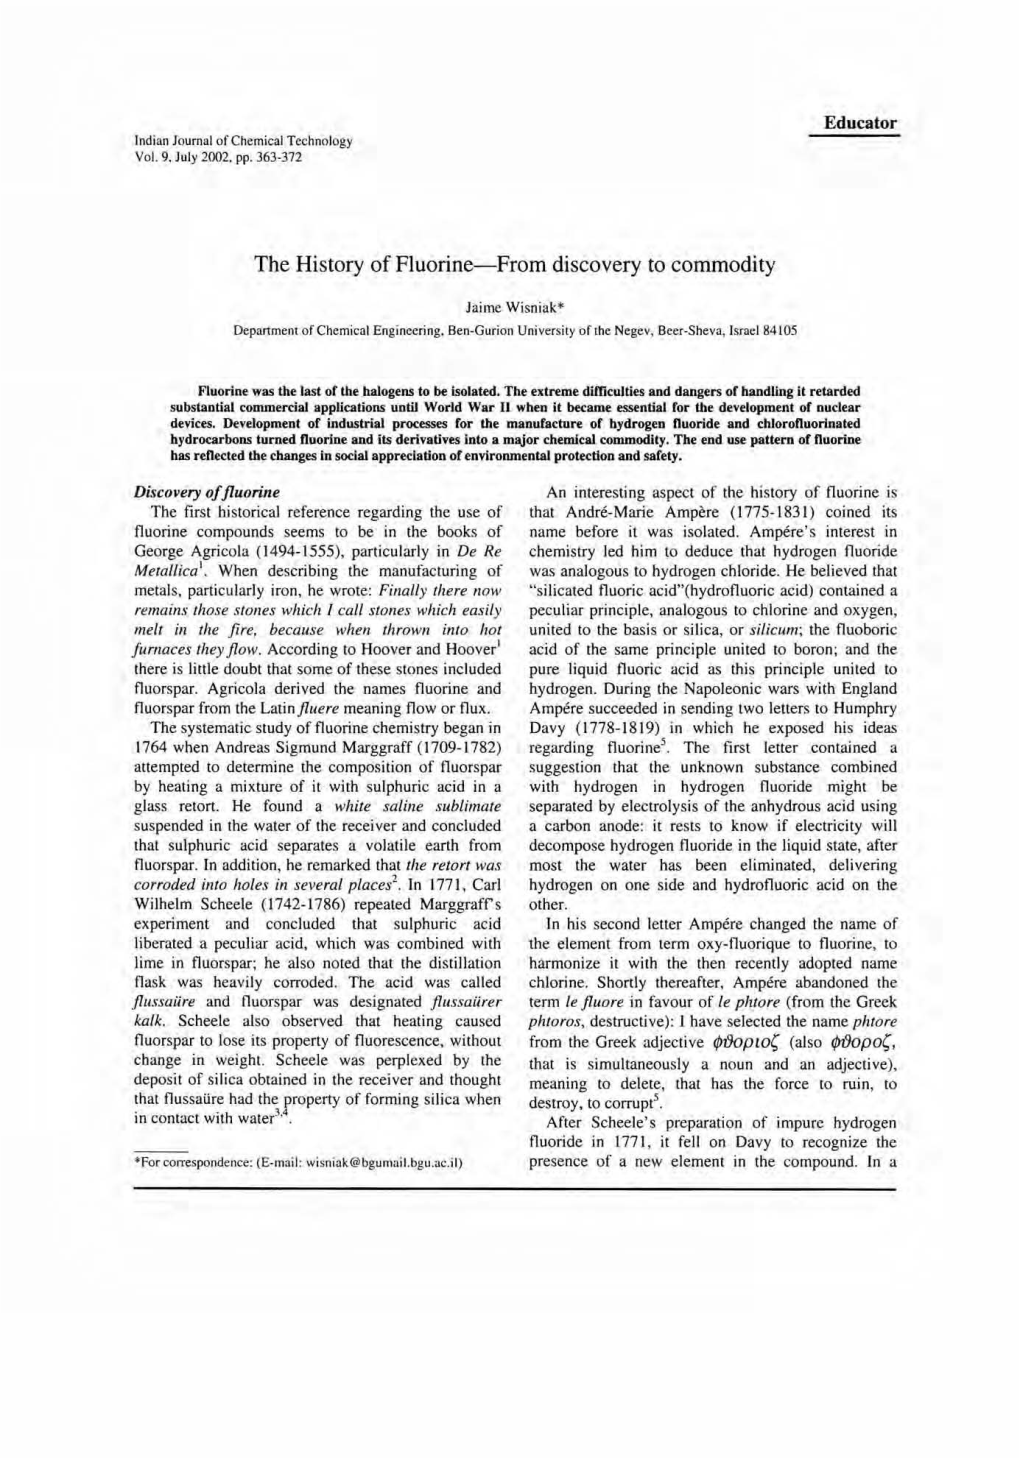 The History of Fluorine-From Discovery to Commodity